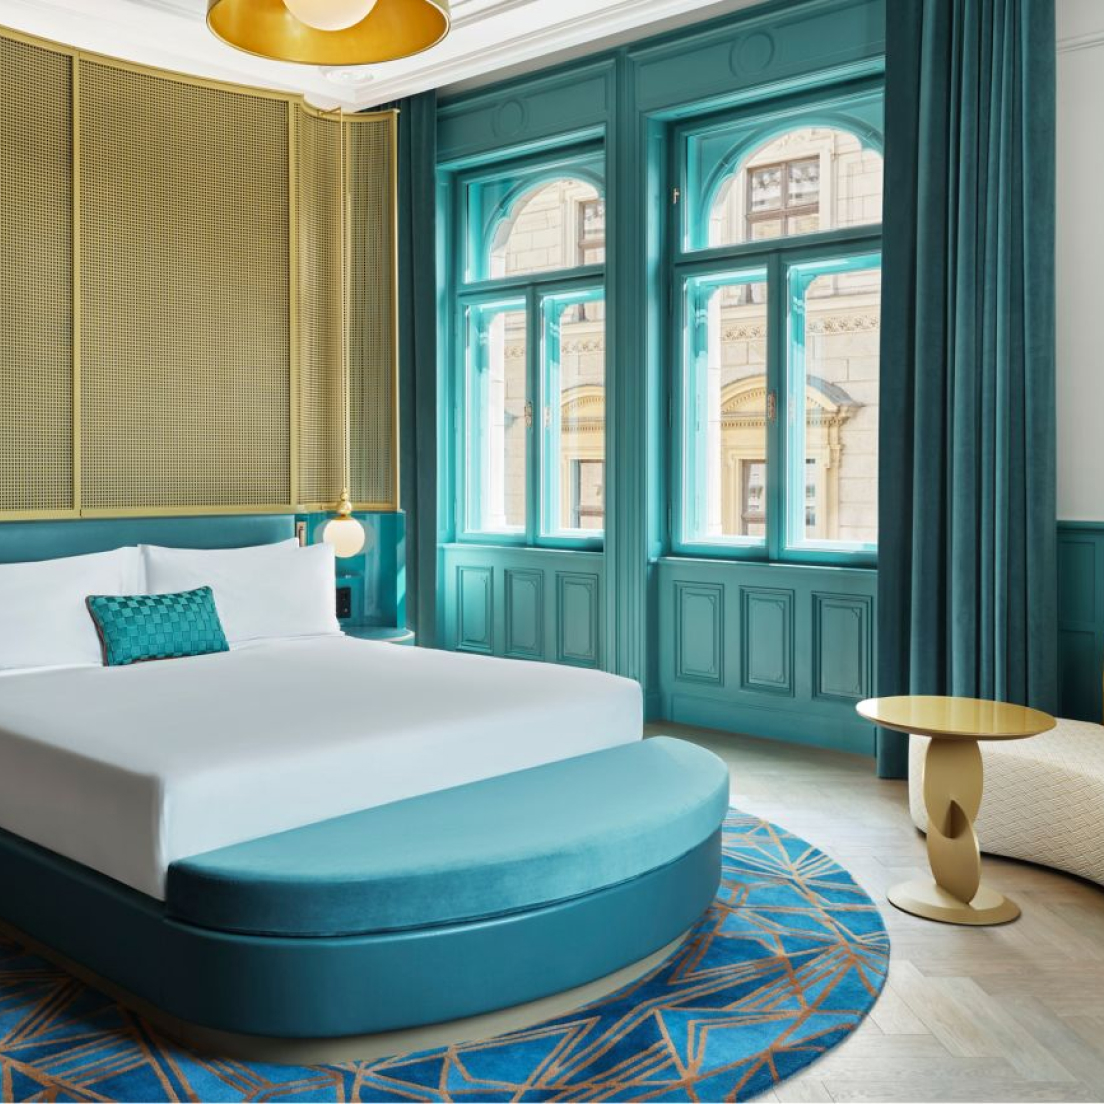 Elegant hotel room with teal walls and matching round bed, large windows with street view, golden ceiling light, and a small modern side table.